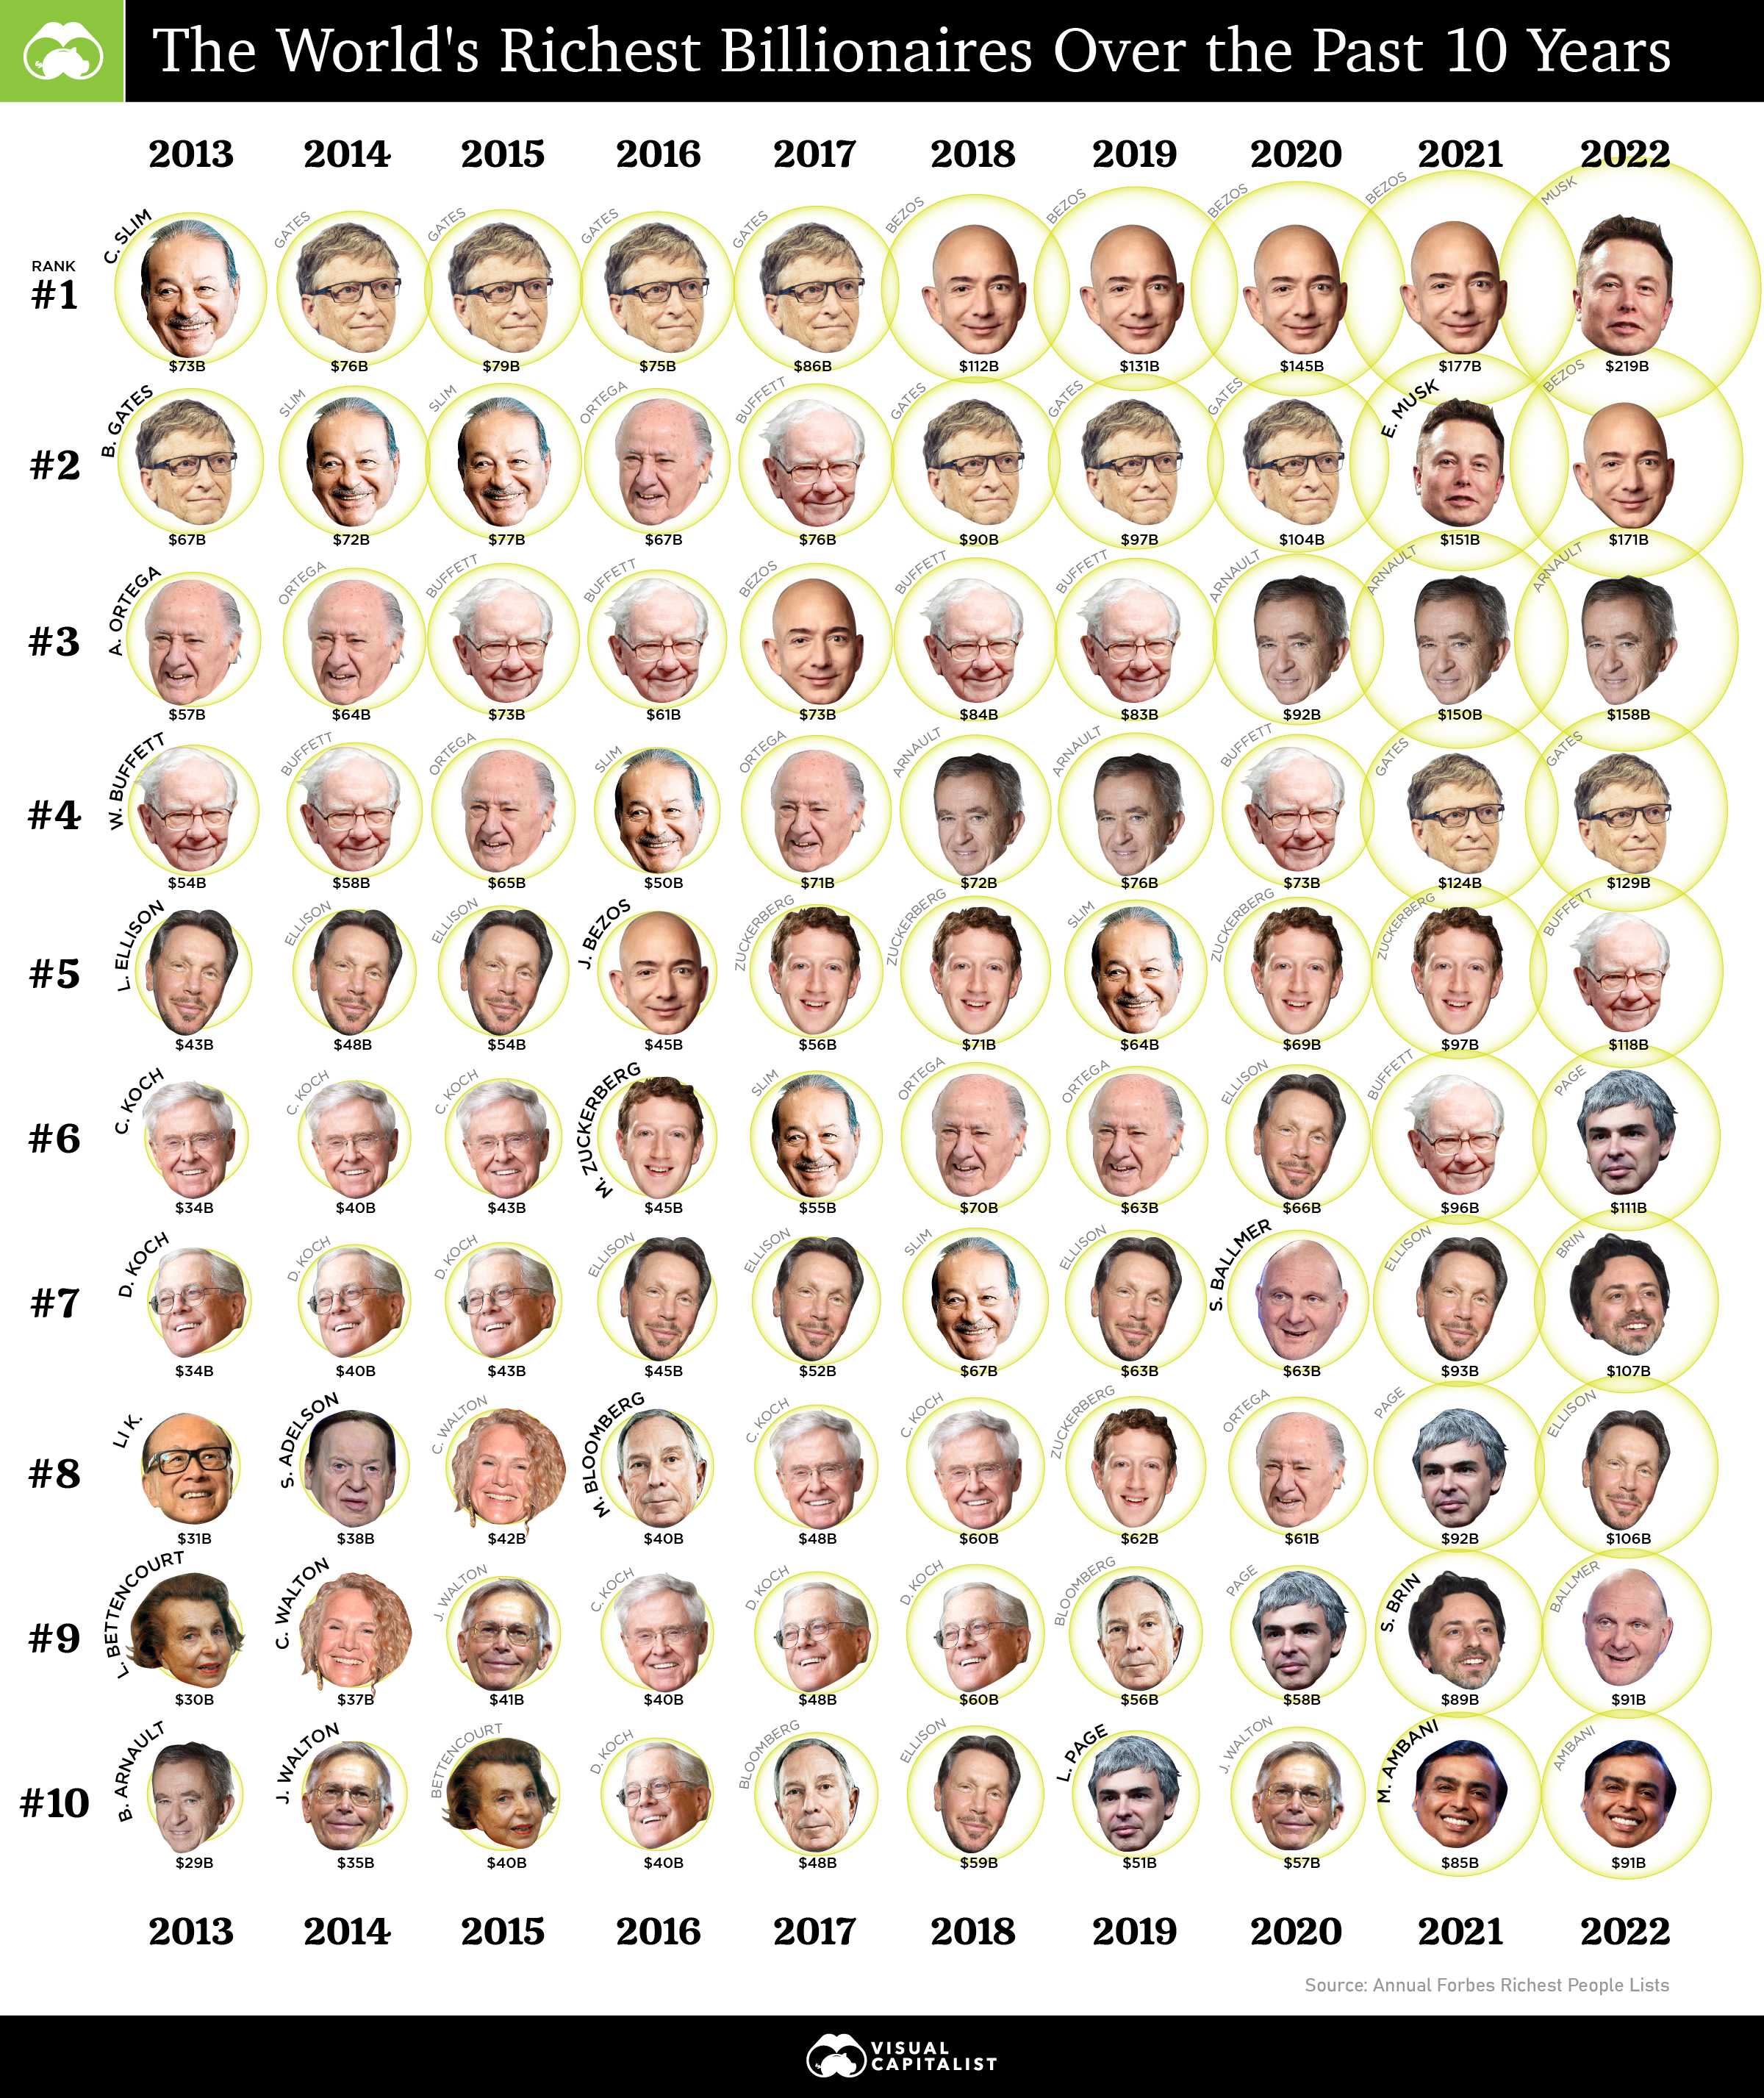 Mapping the World's Top 30 Richest Men